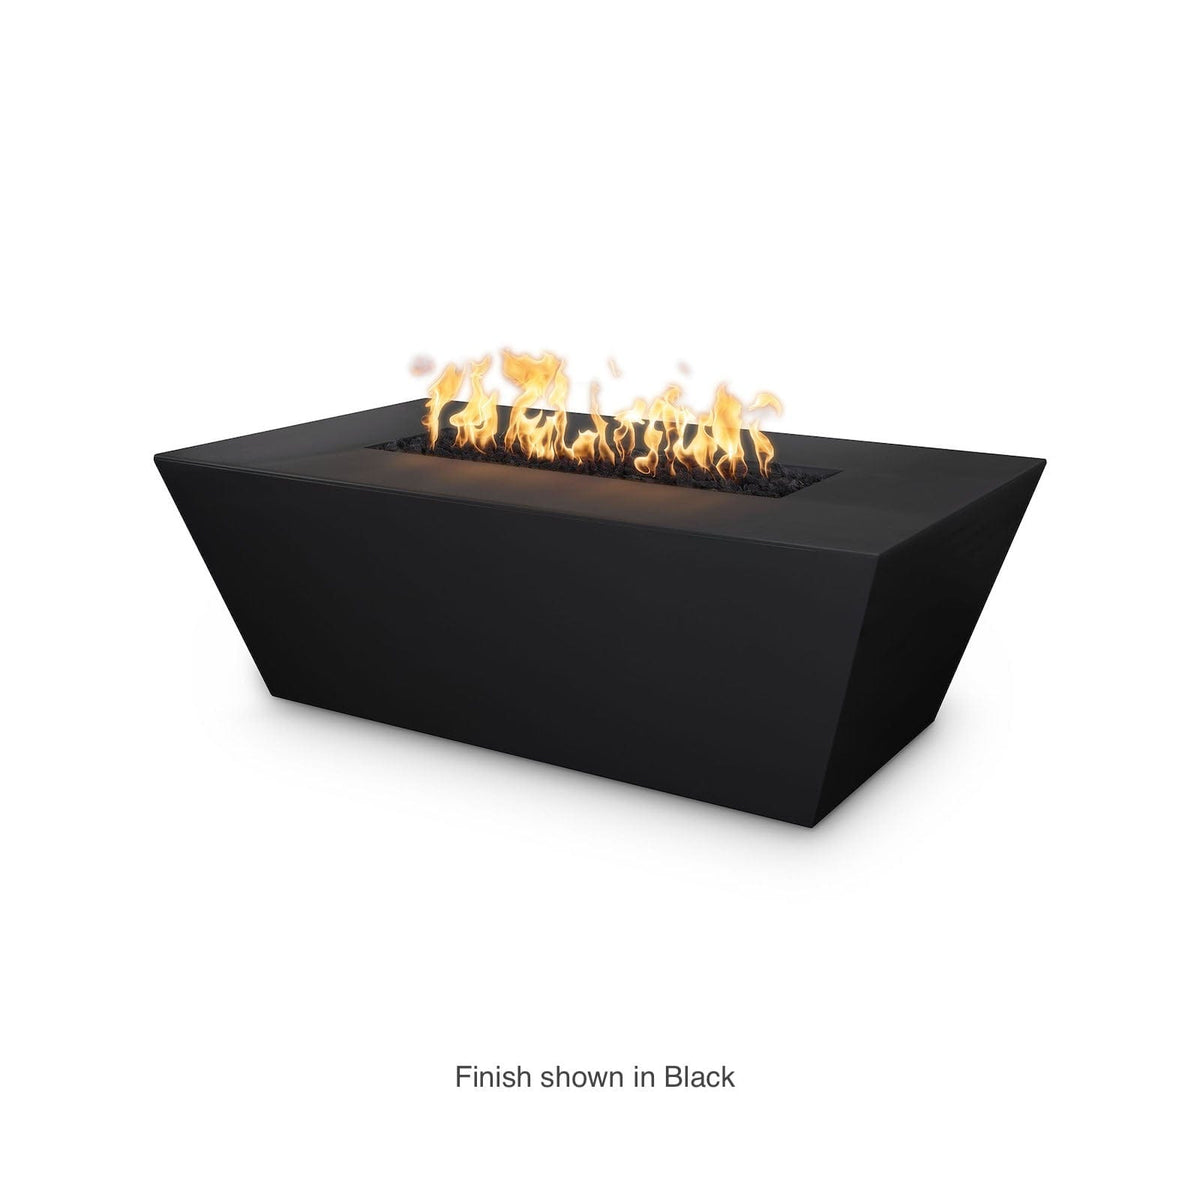 The Outdoor Plus Fire Features The Outdoor Plus 60&quot; Rectangular Angelus Fire Pit in Metallic and Rustic Finishes - GFRC Concrete / OPT-AGLGF60, OPT-AGLGF60FSML, OPT-AGLGF60FSEN, OPT-AGLGF60E12V, OPT-AGLGF60EKIT